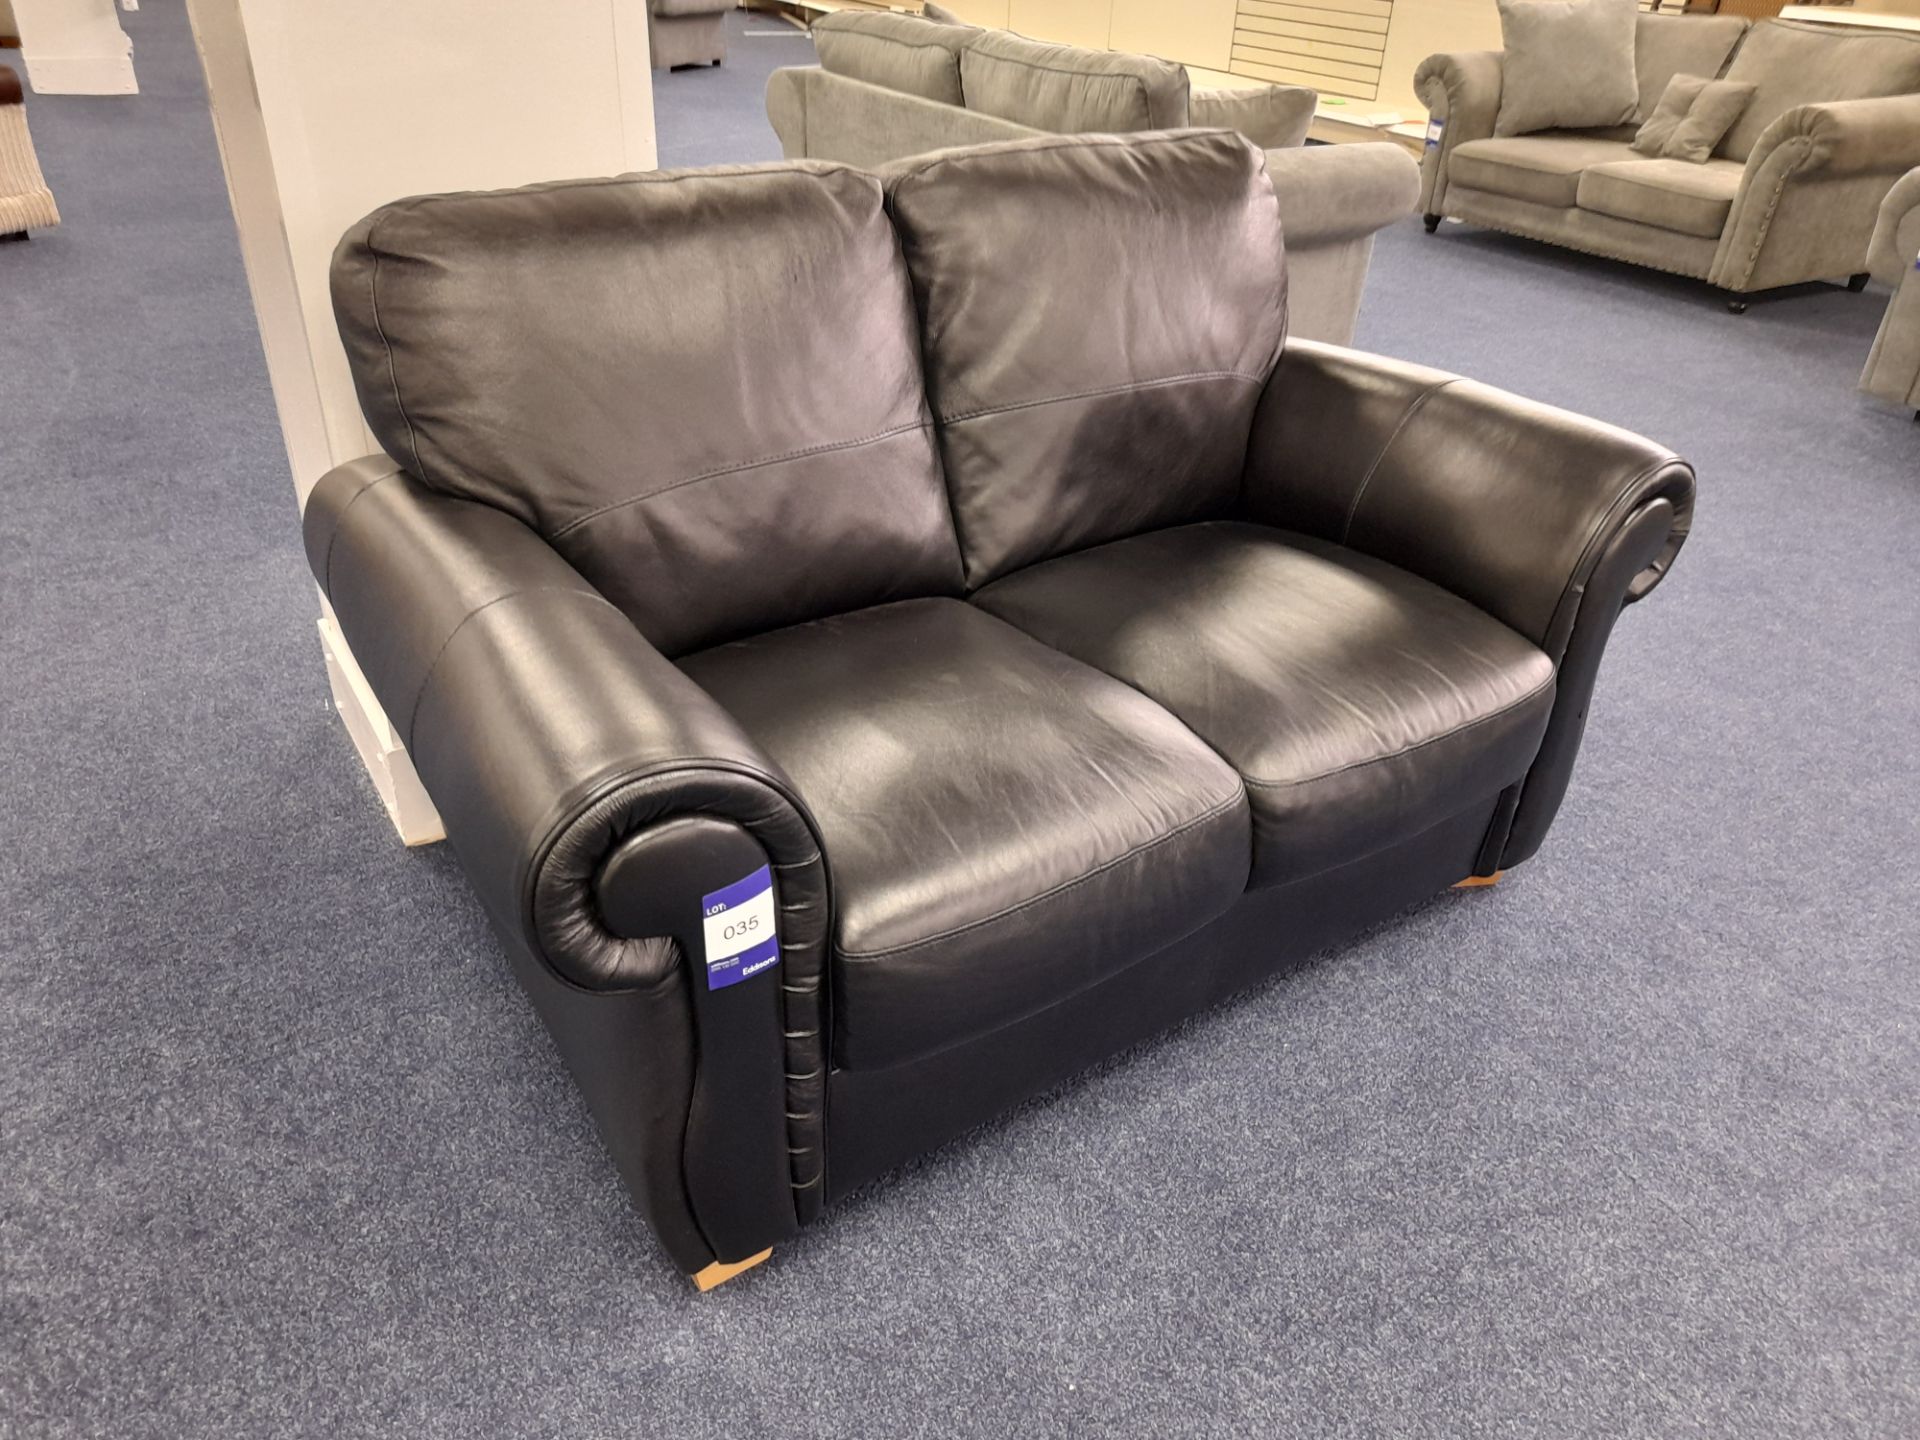 Black leather upholstered, 2 seater, standard cushioned back sofa (Ex-Display) - Image 5 of 5